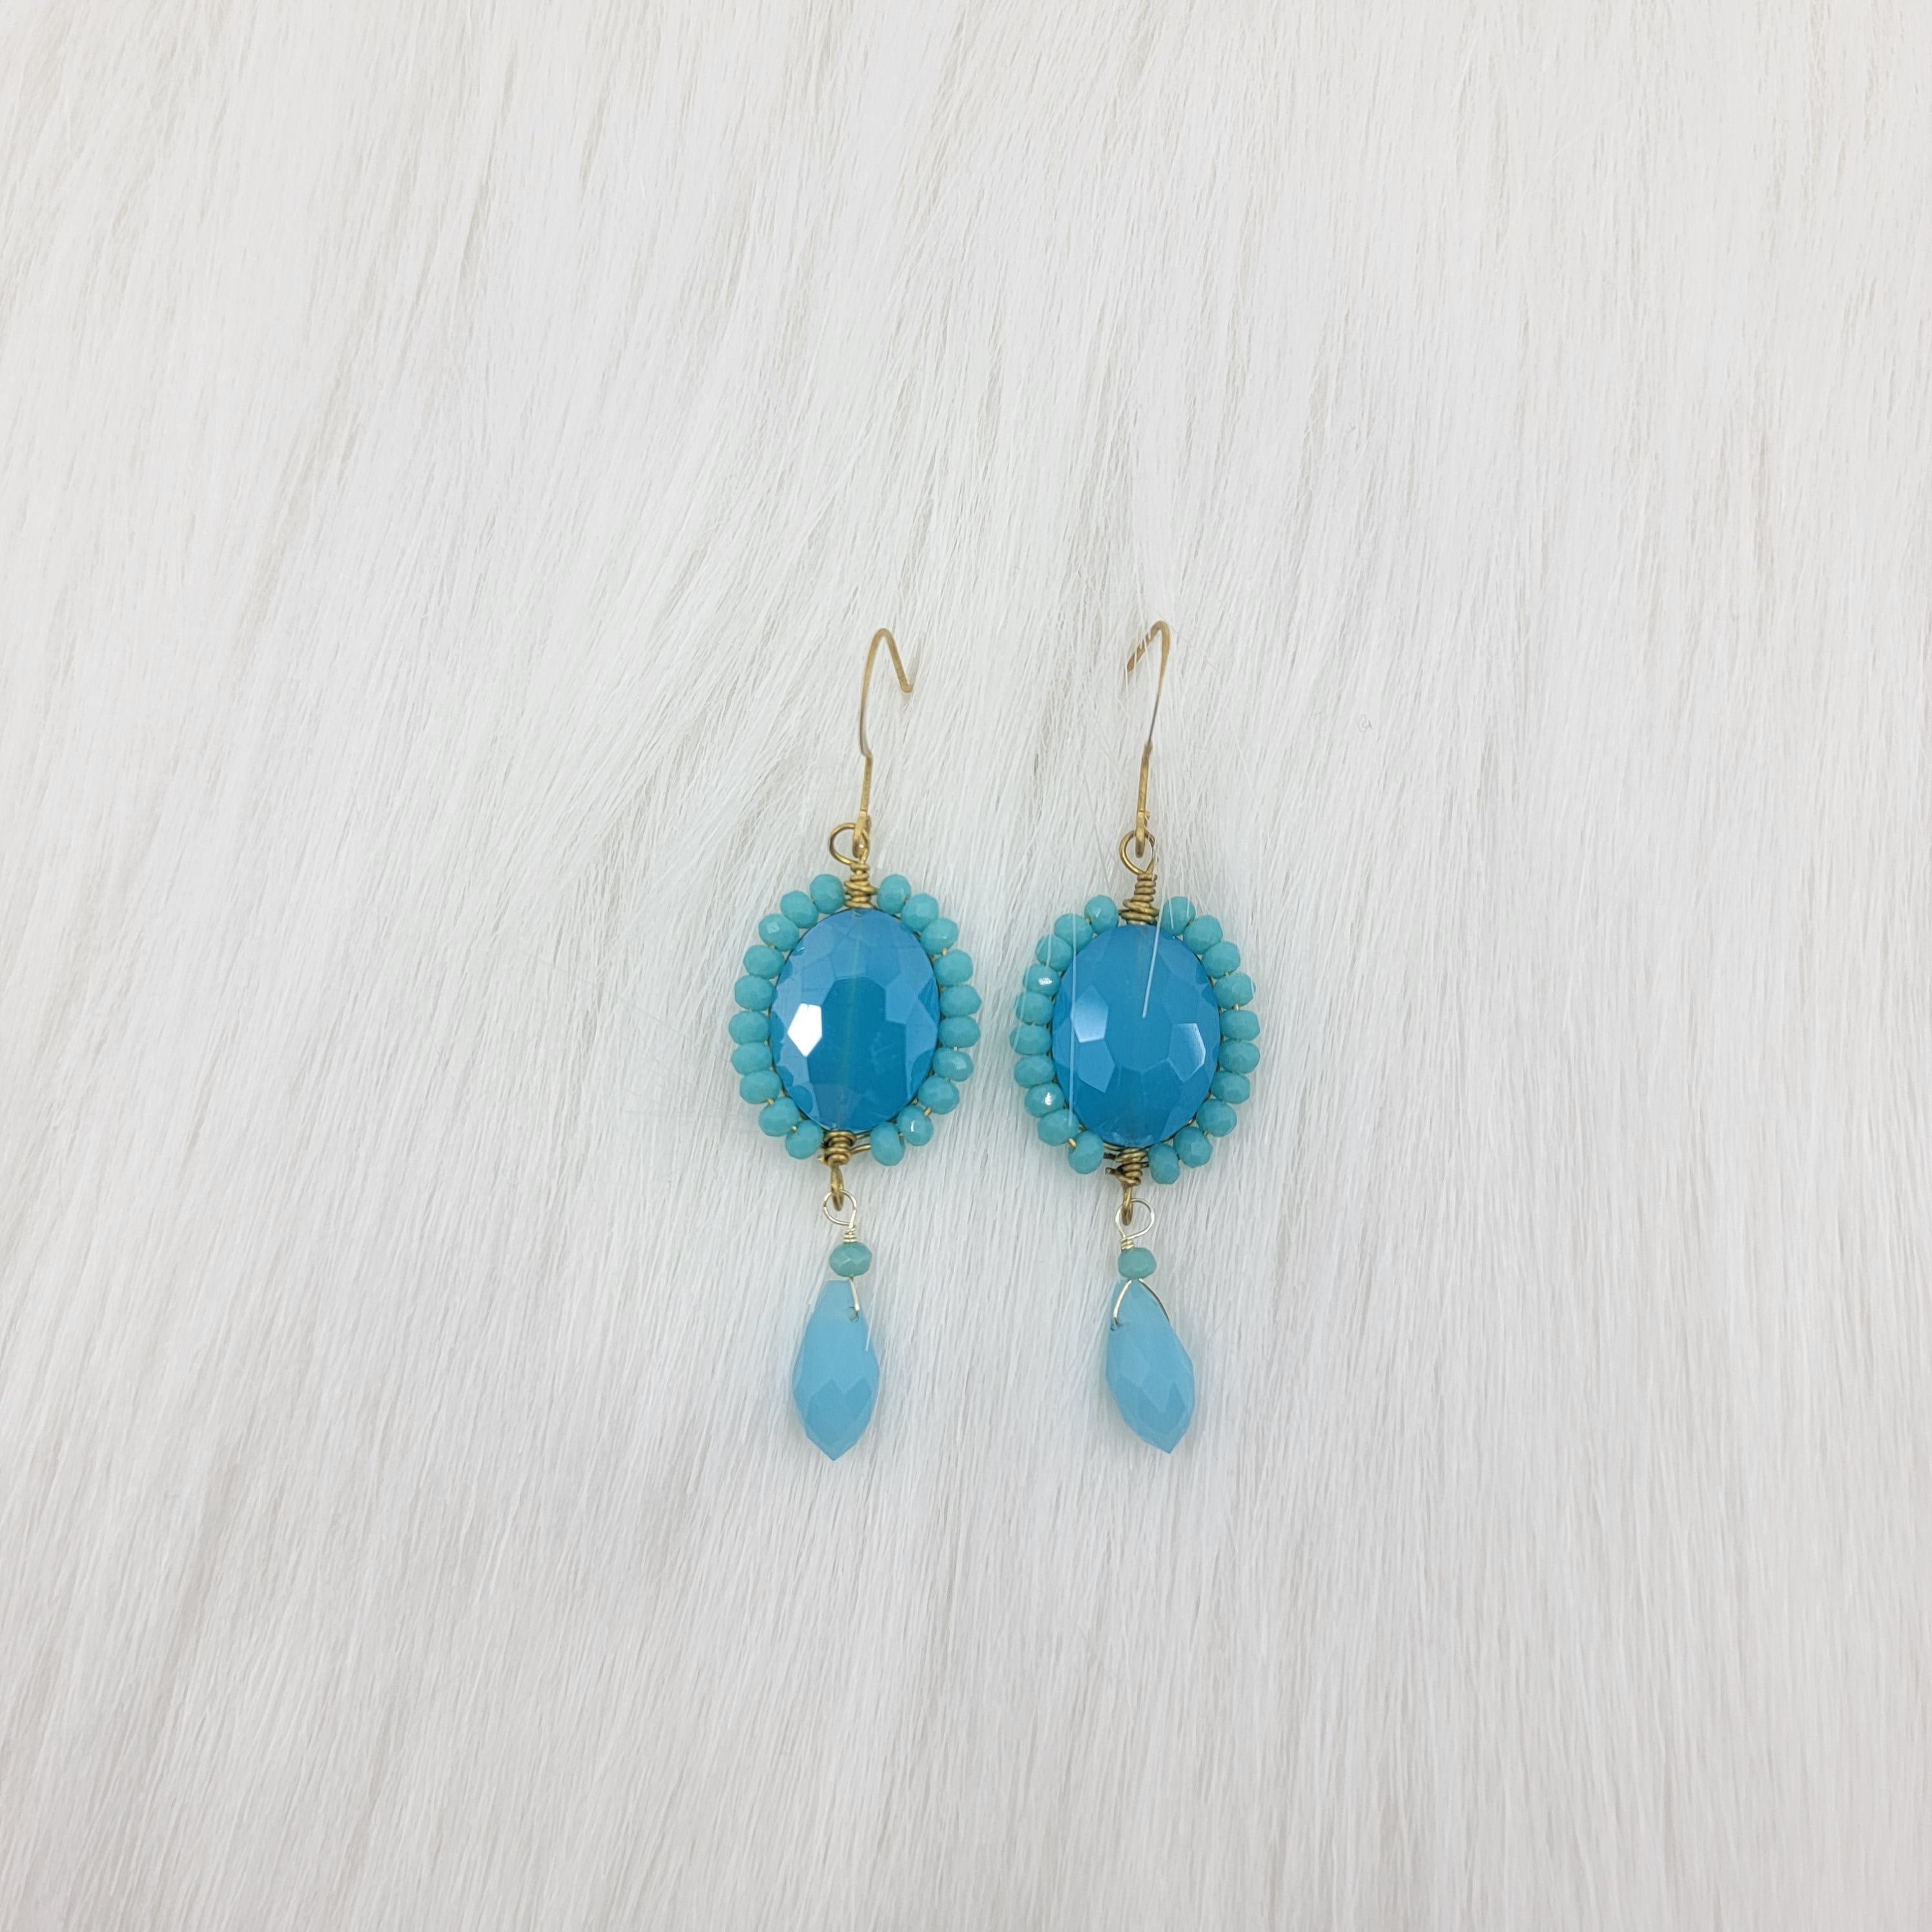 Crystal Beads Wrapped Teardrop Earrings With Drop Crystal